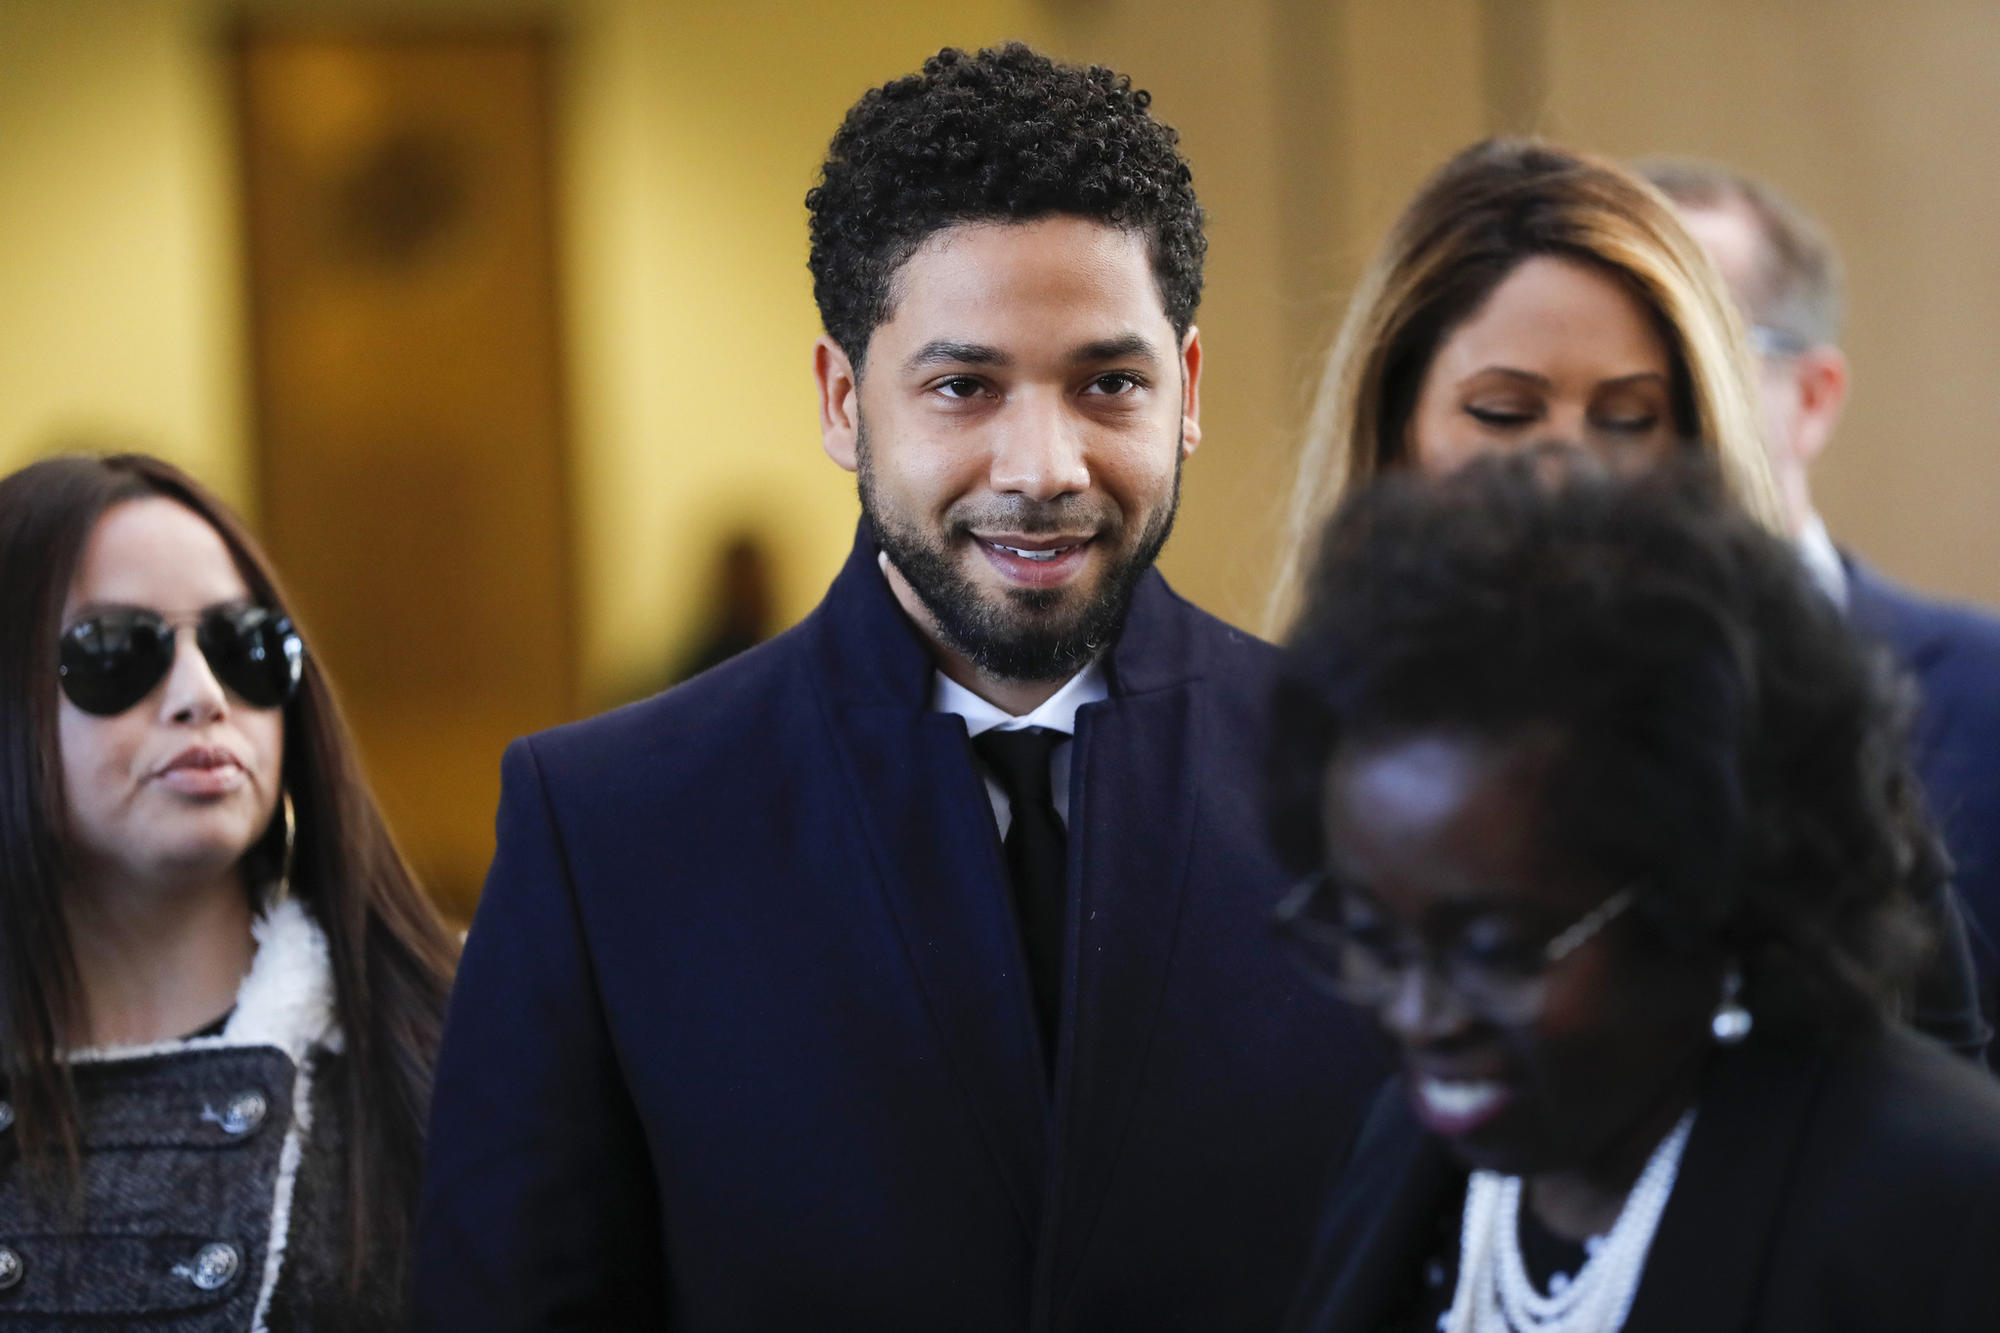 In latest plot twist, Cook County prosecutors abruptly drop all charges against Jussie ...